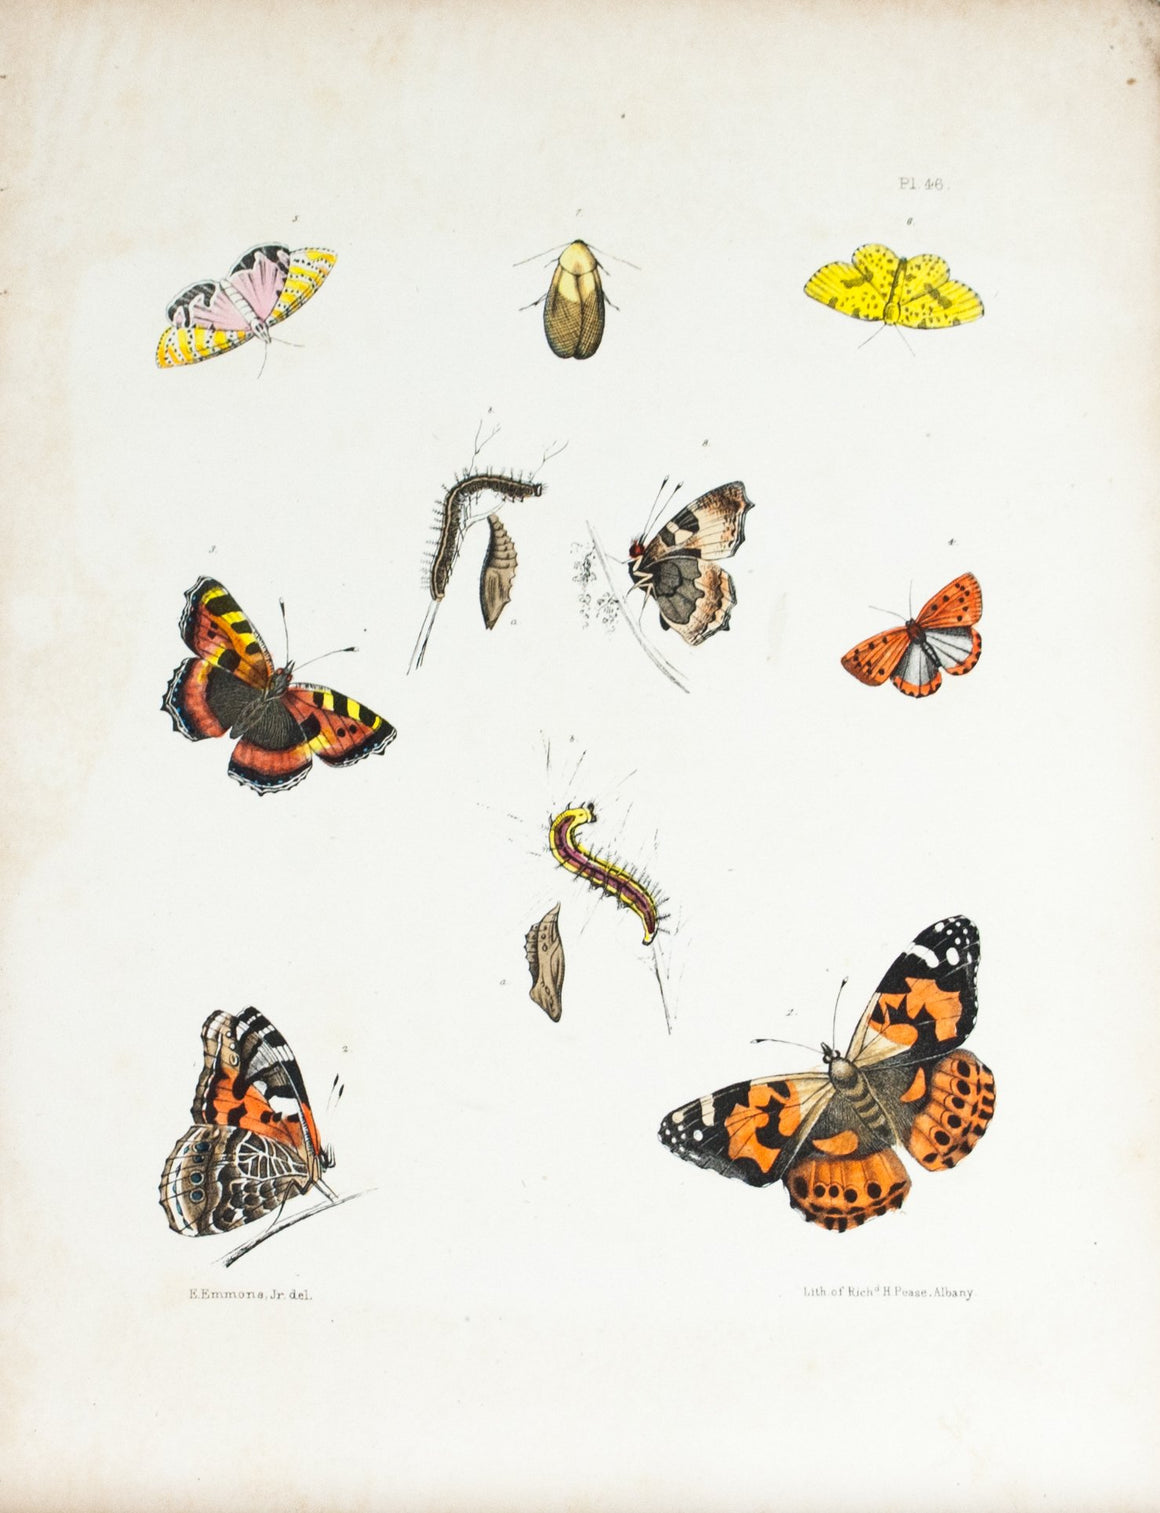 1854 Plate 46 - Painted Lady Butterfly - Emmons 